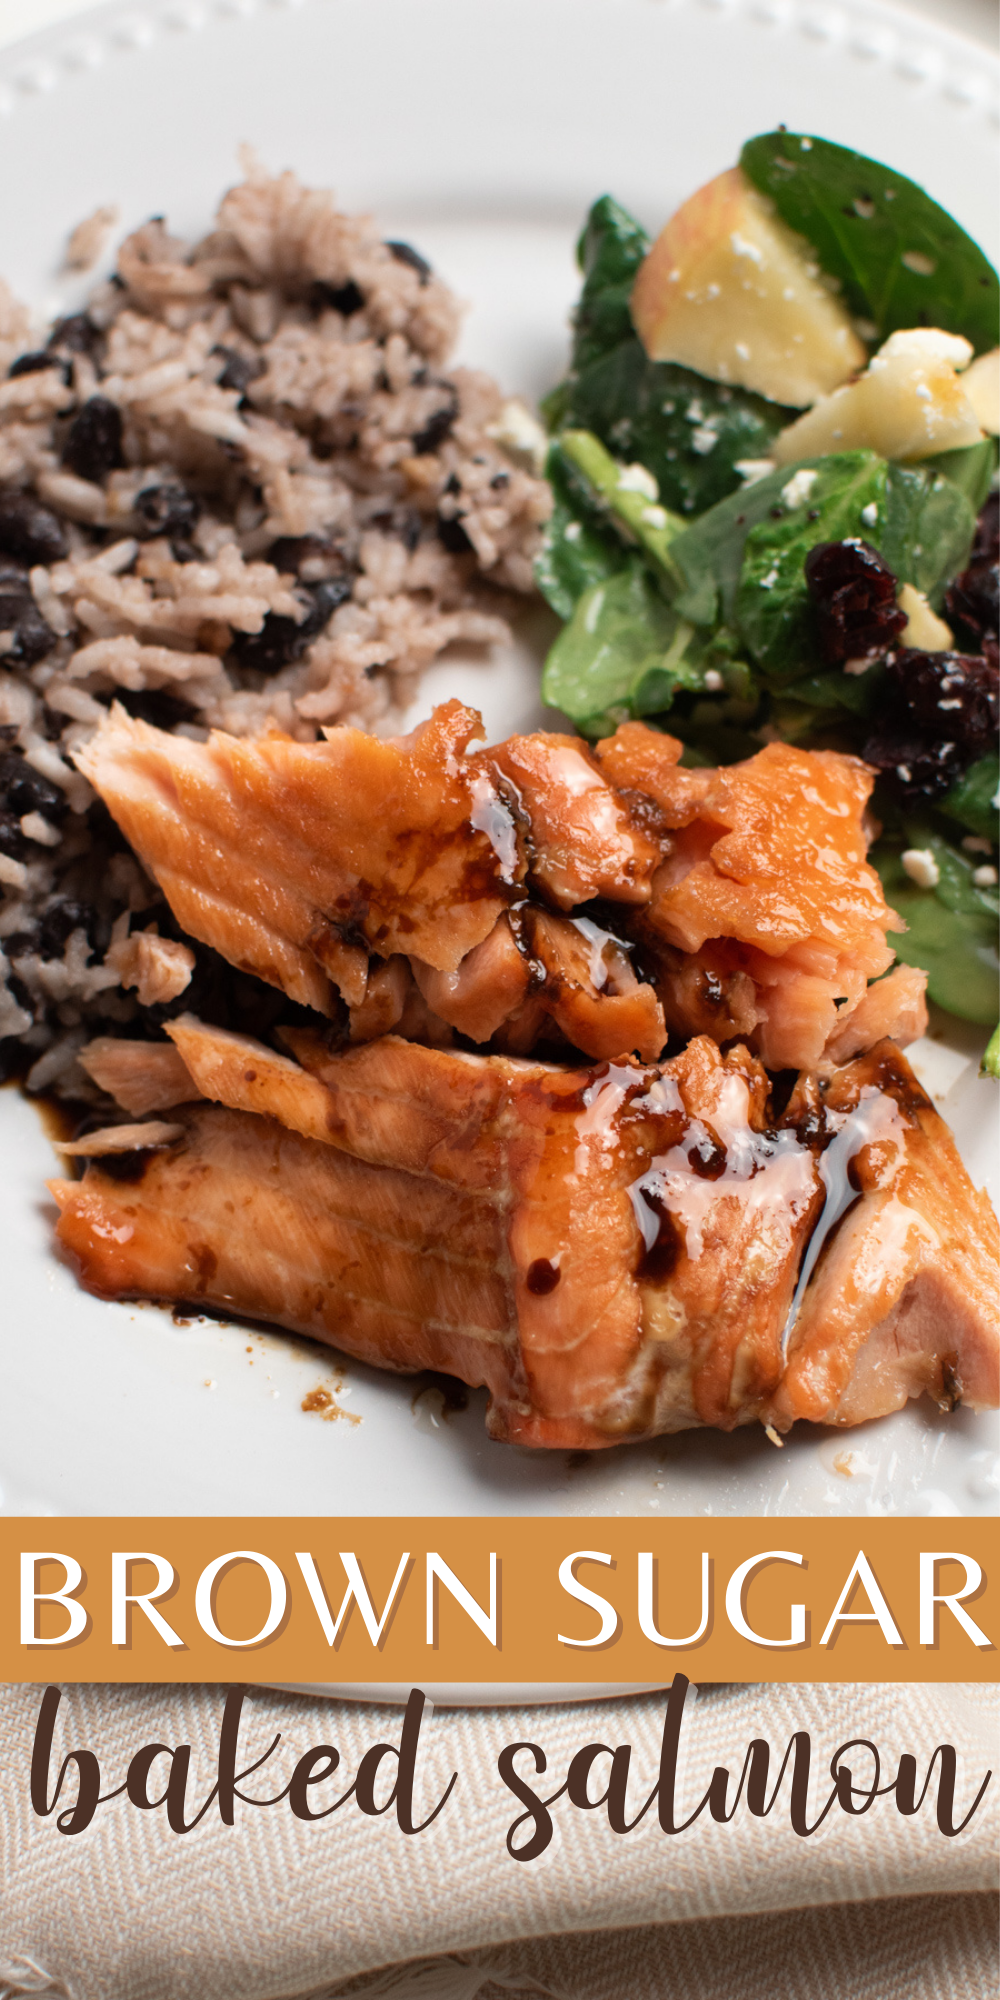 A Pinterest image with text and a piece of brown sugar baked salmon on a plate.